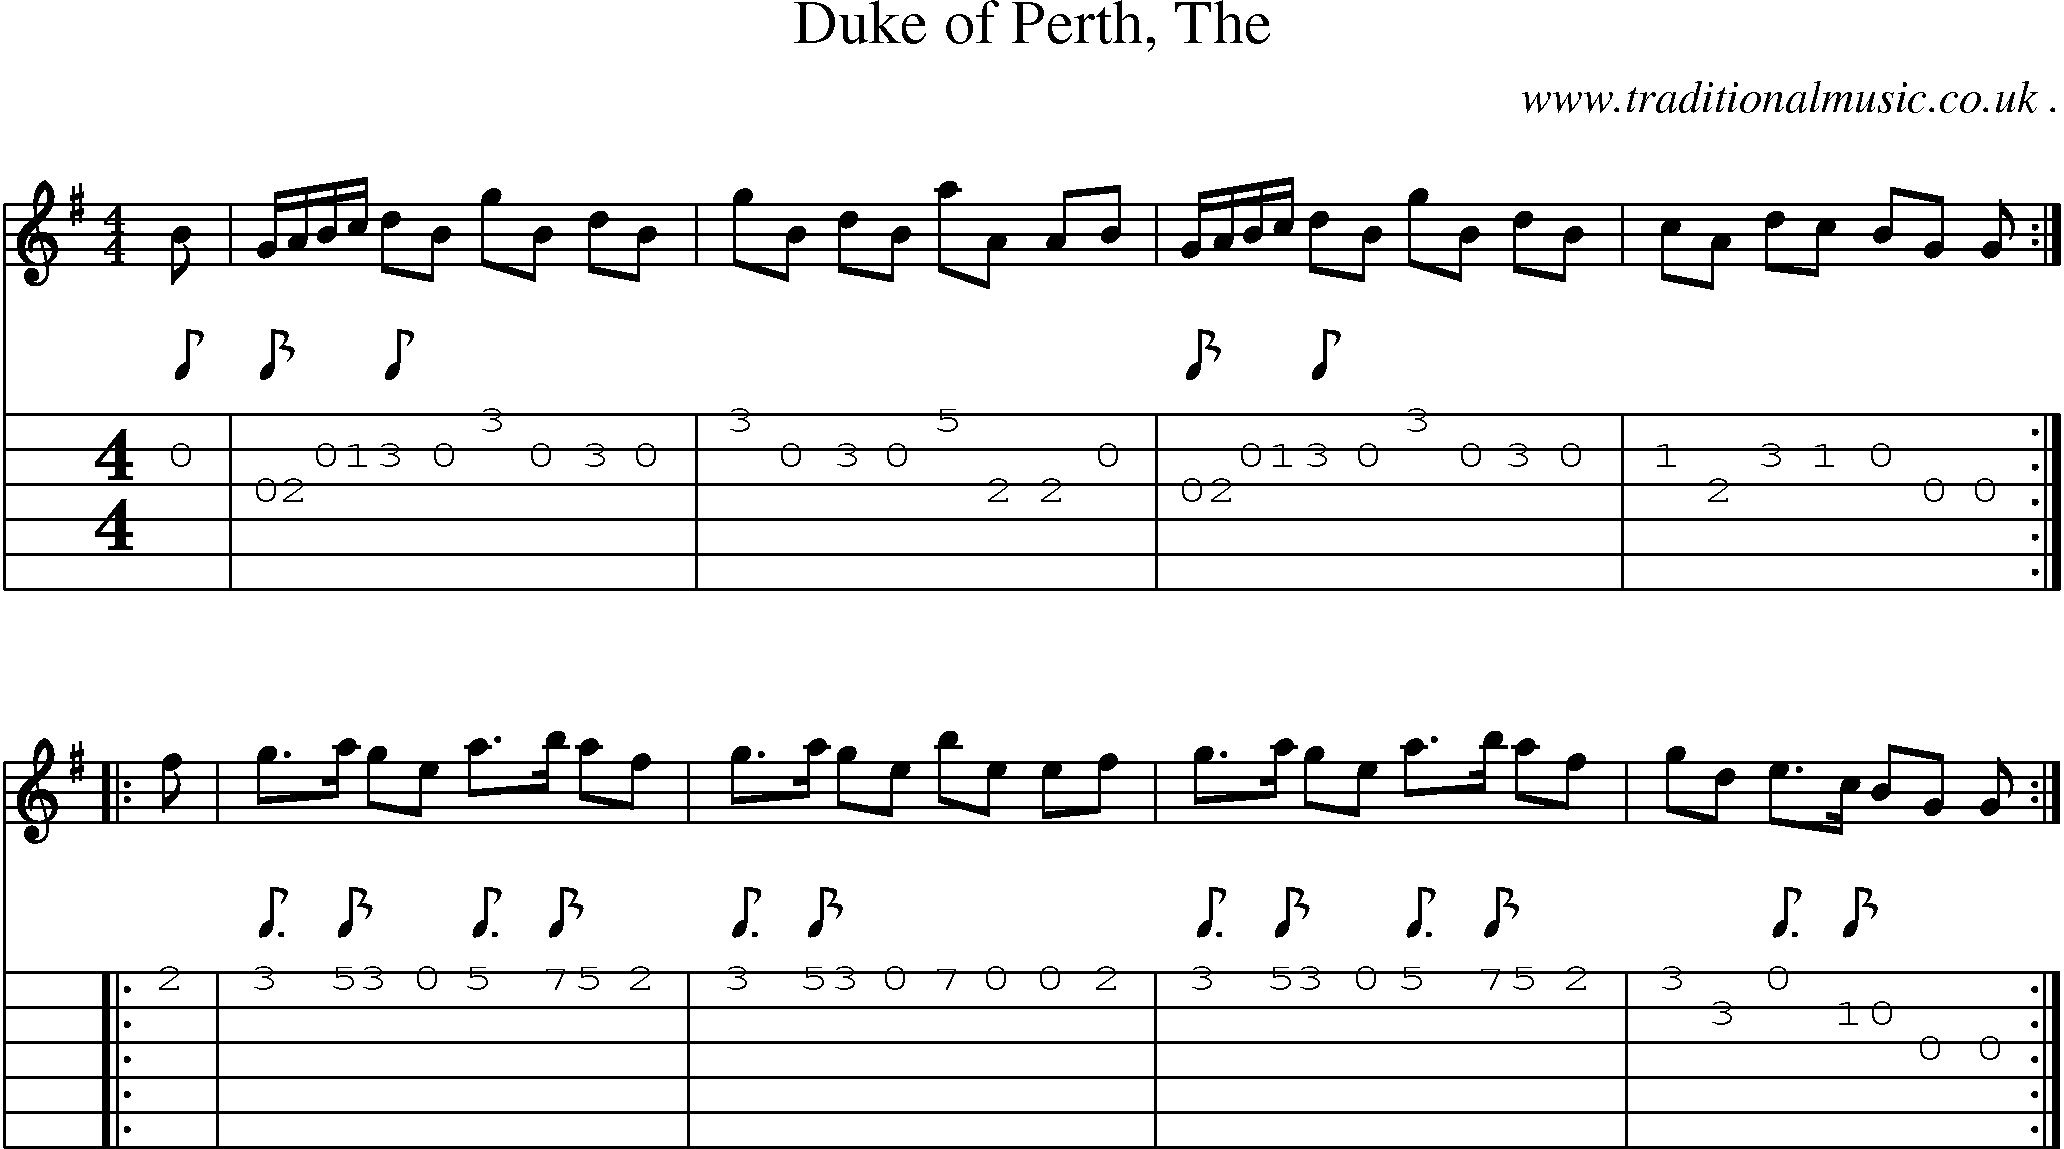 Sheet-music  score, Chords and Guitar Tabs for Duke Of Perth The